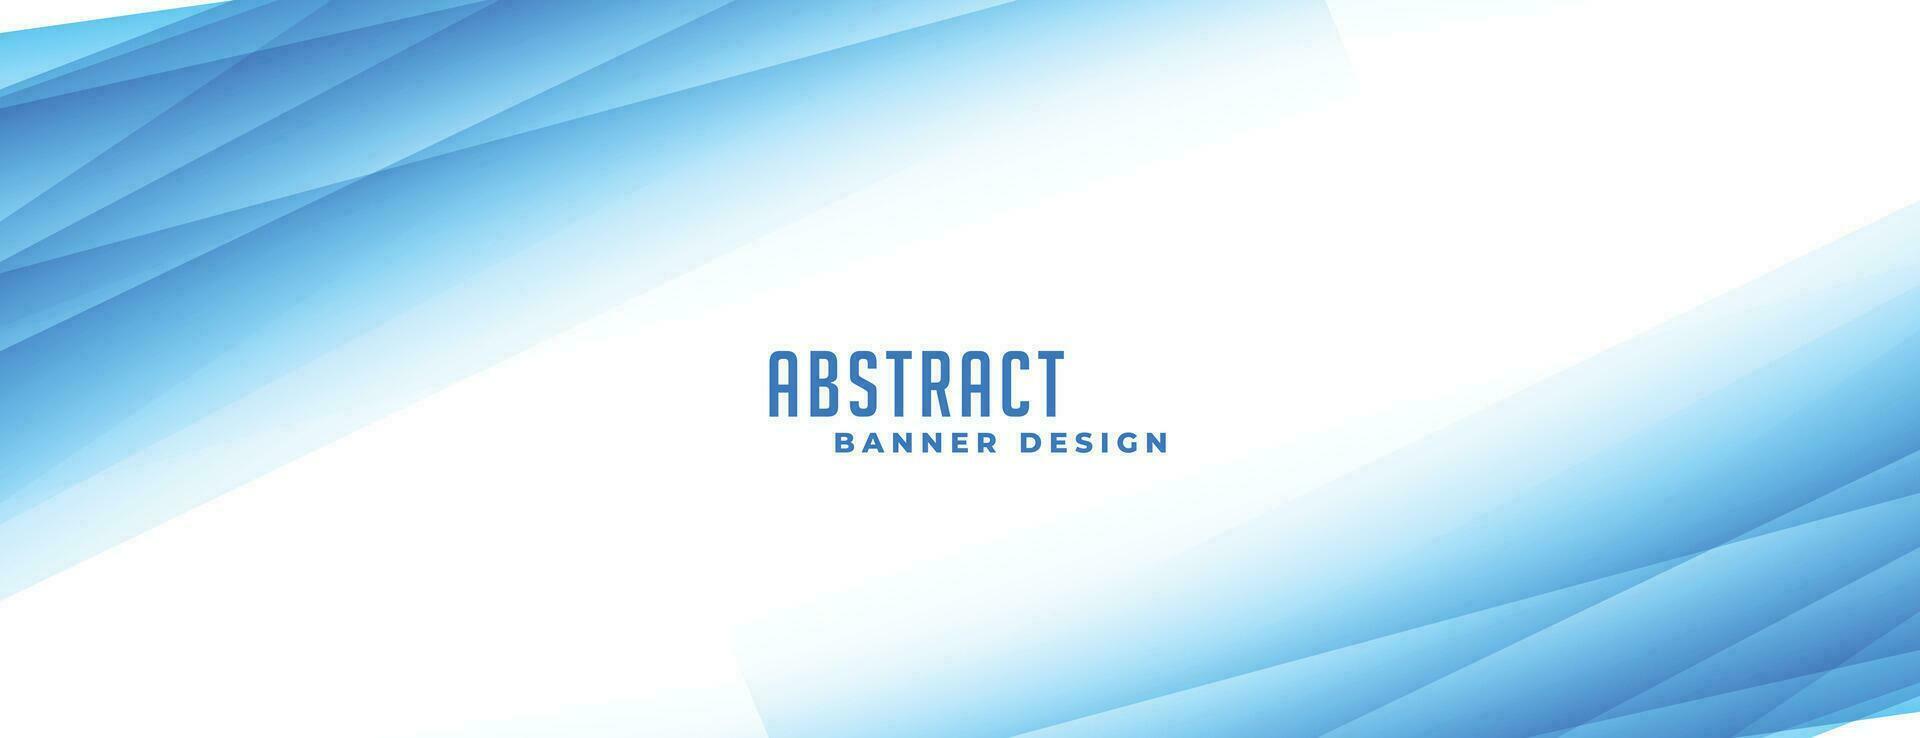 abstract blue banner with gradient lines vector